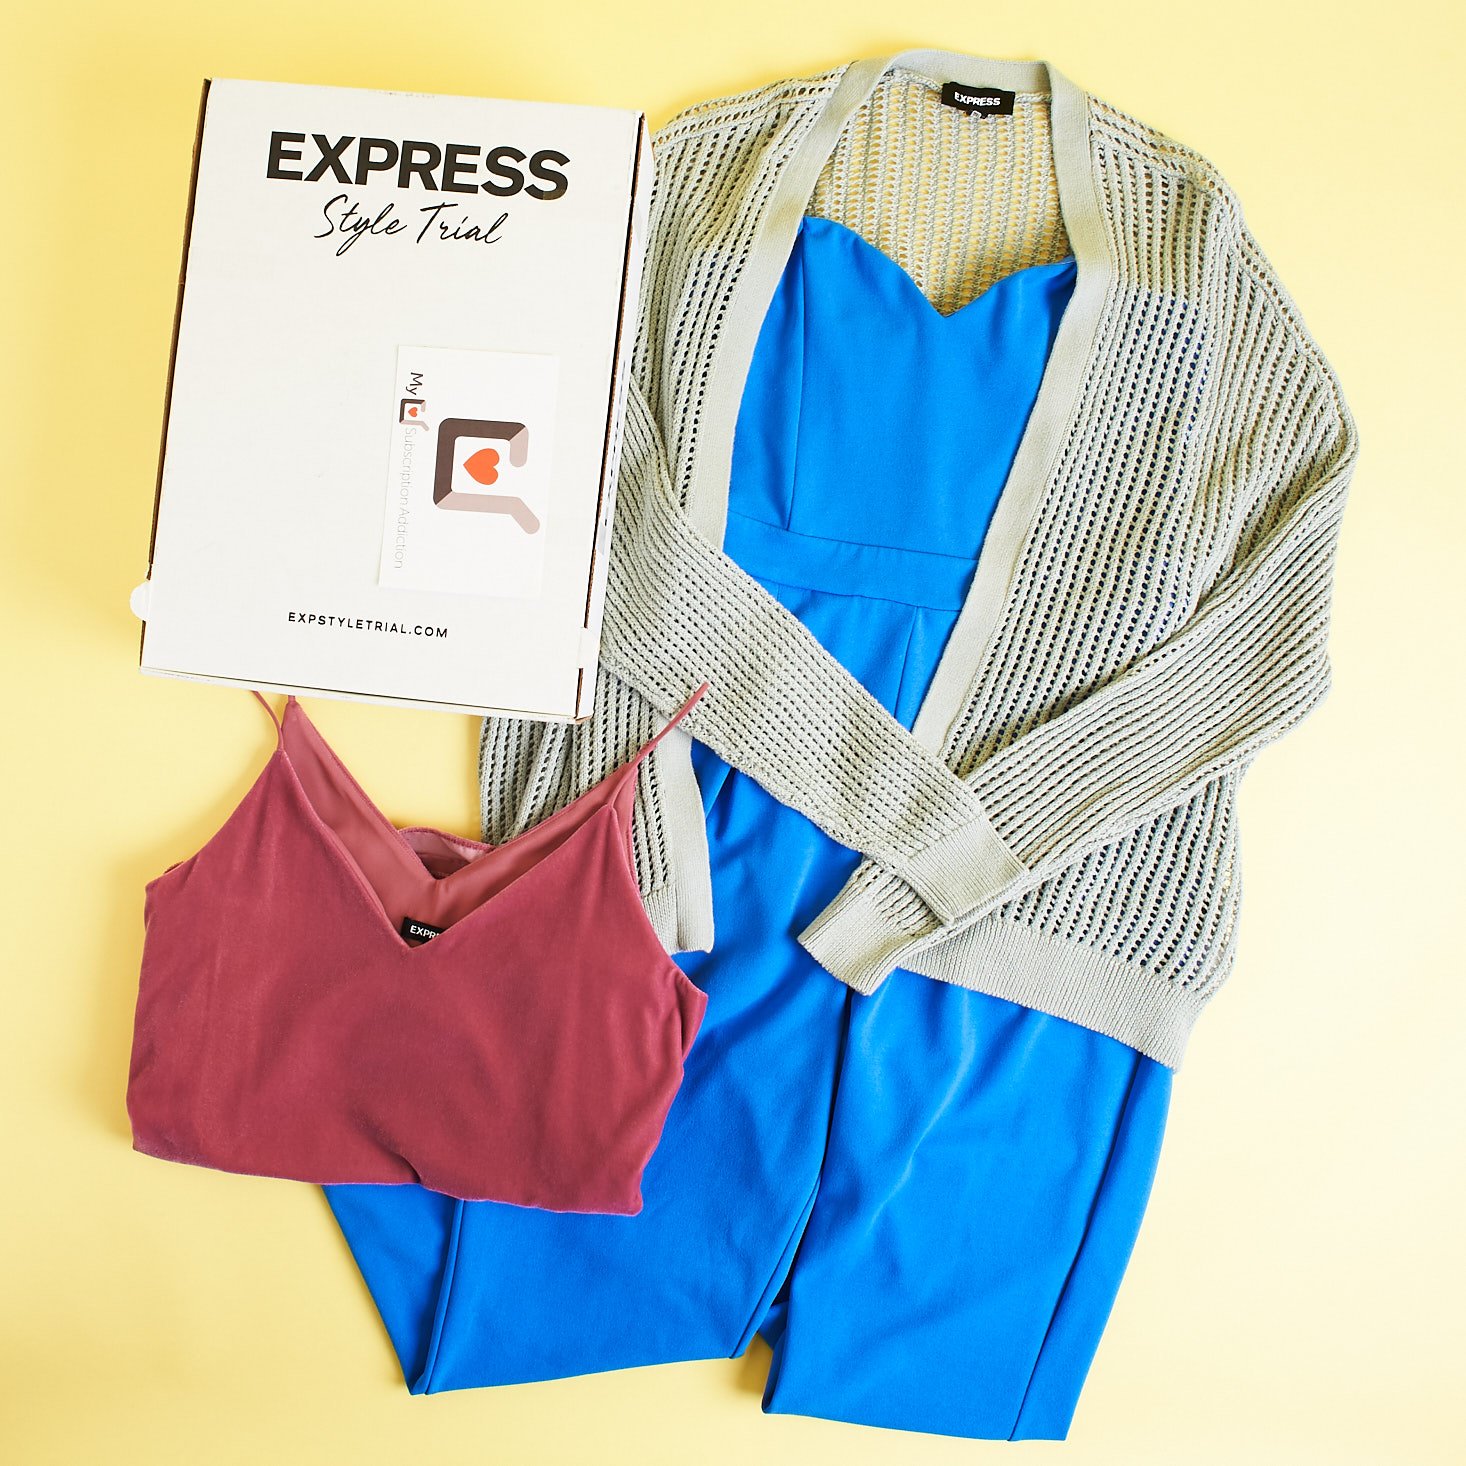 3 Express clothing items around Express Style Trial Box